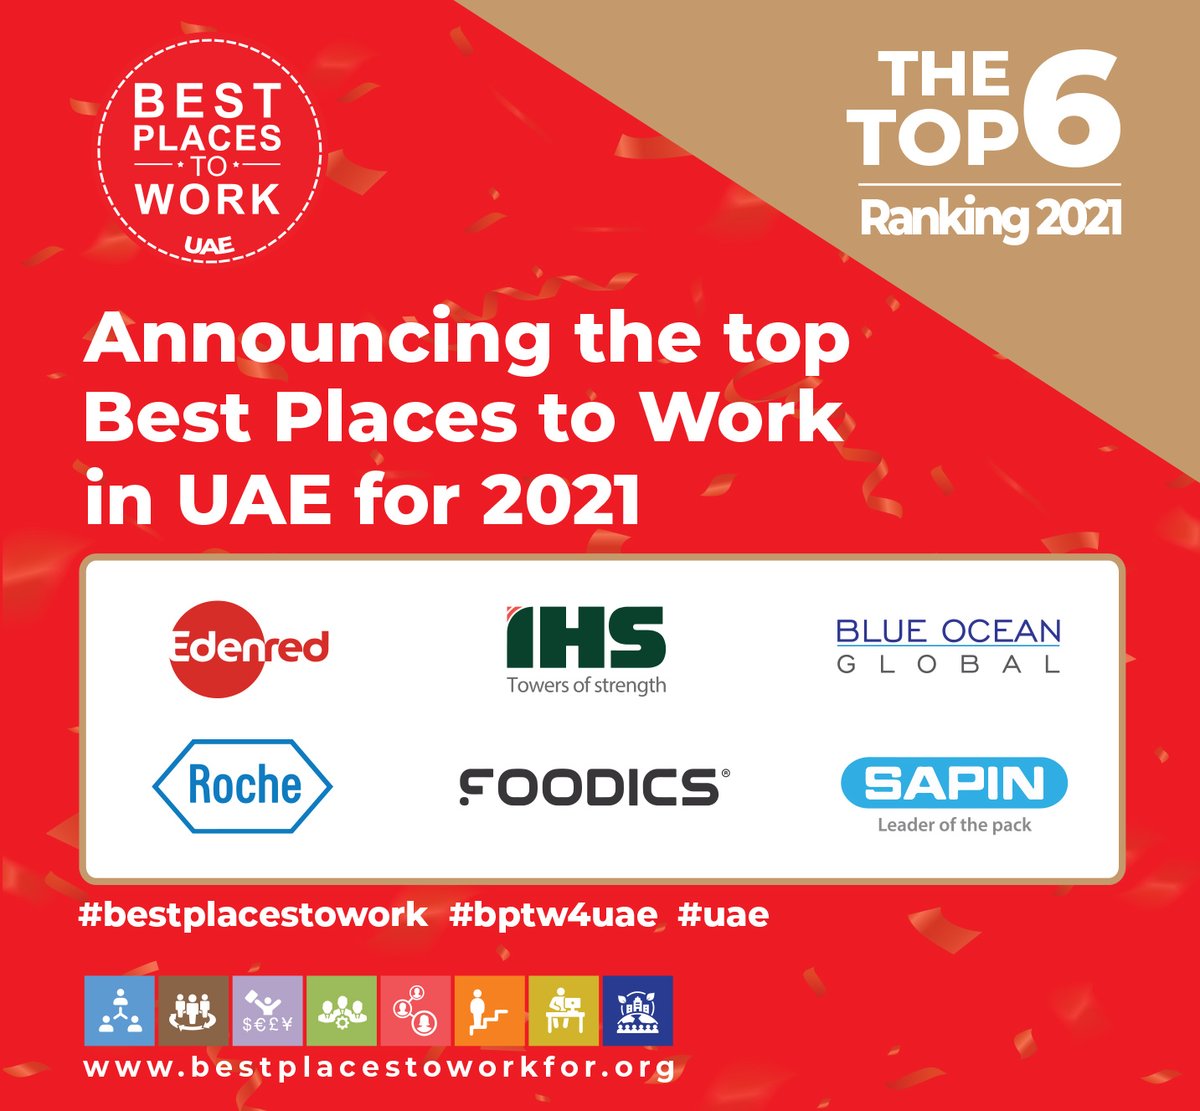 Congratulations to the #top 6 Best Places to Work in #UAE for #2021 Edenred UAE IHS Towers Blue Ocean Global Roche Foodics Saudi Arabian Packaging Industry W.L.L - SAPIN #bestplacestowork #employersofchoice #topemployersuae #HR #bptw4uae

lnkd.in/d_GYse9N